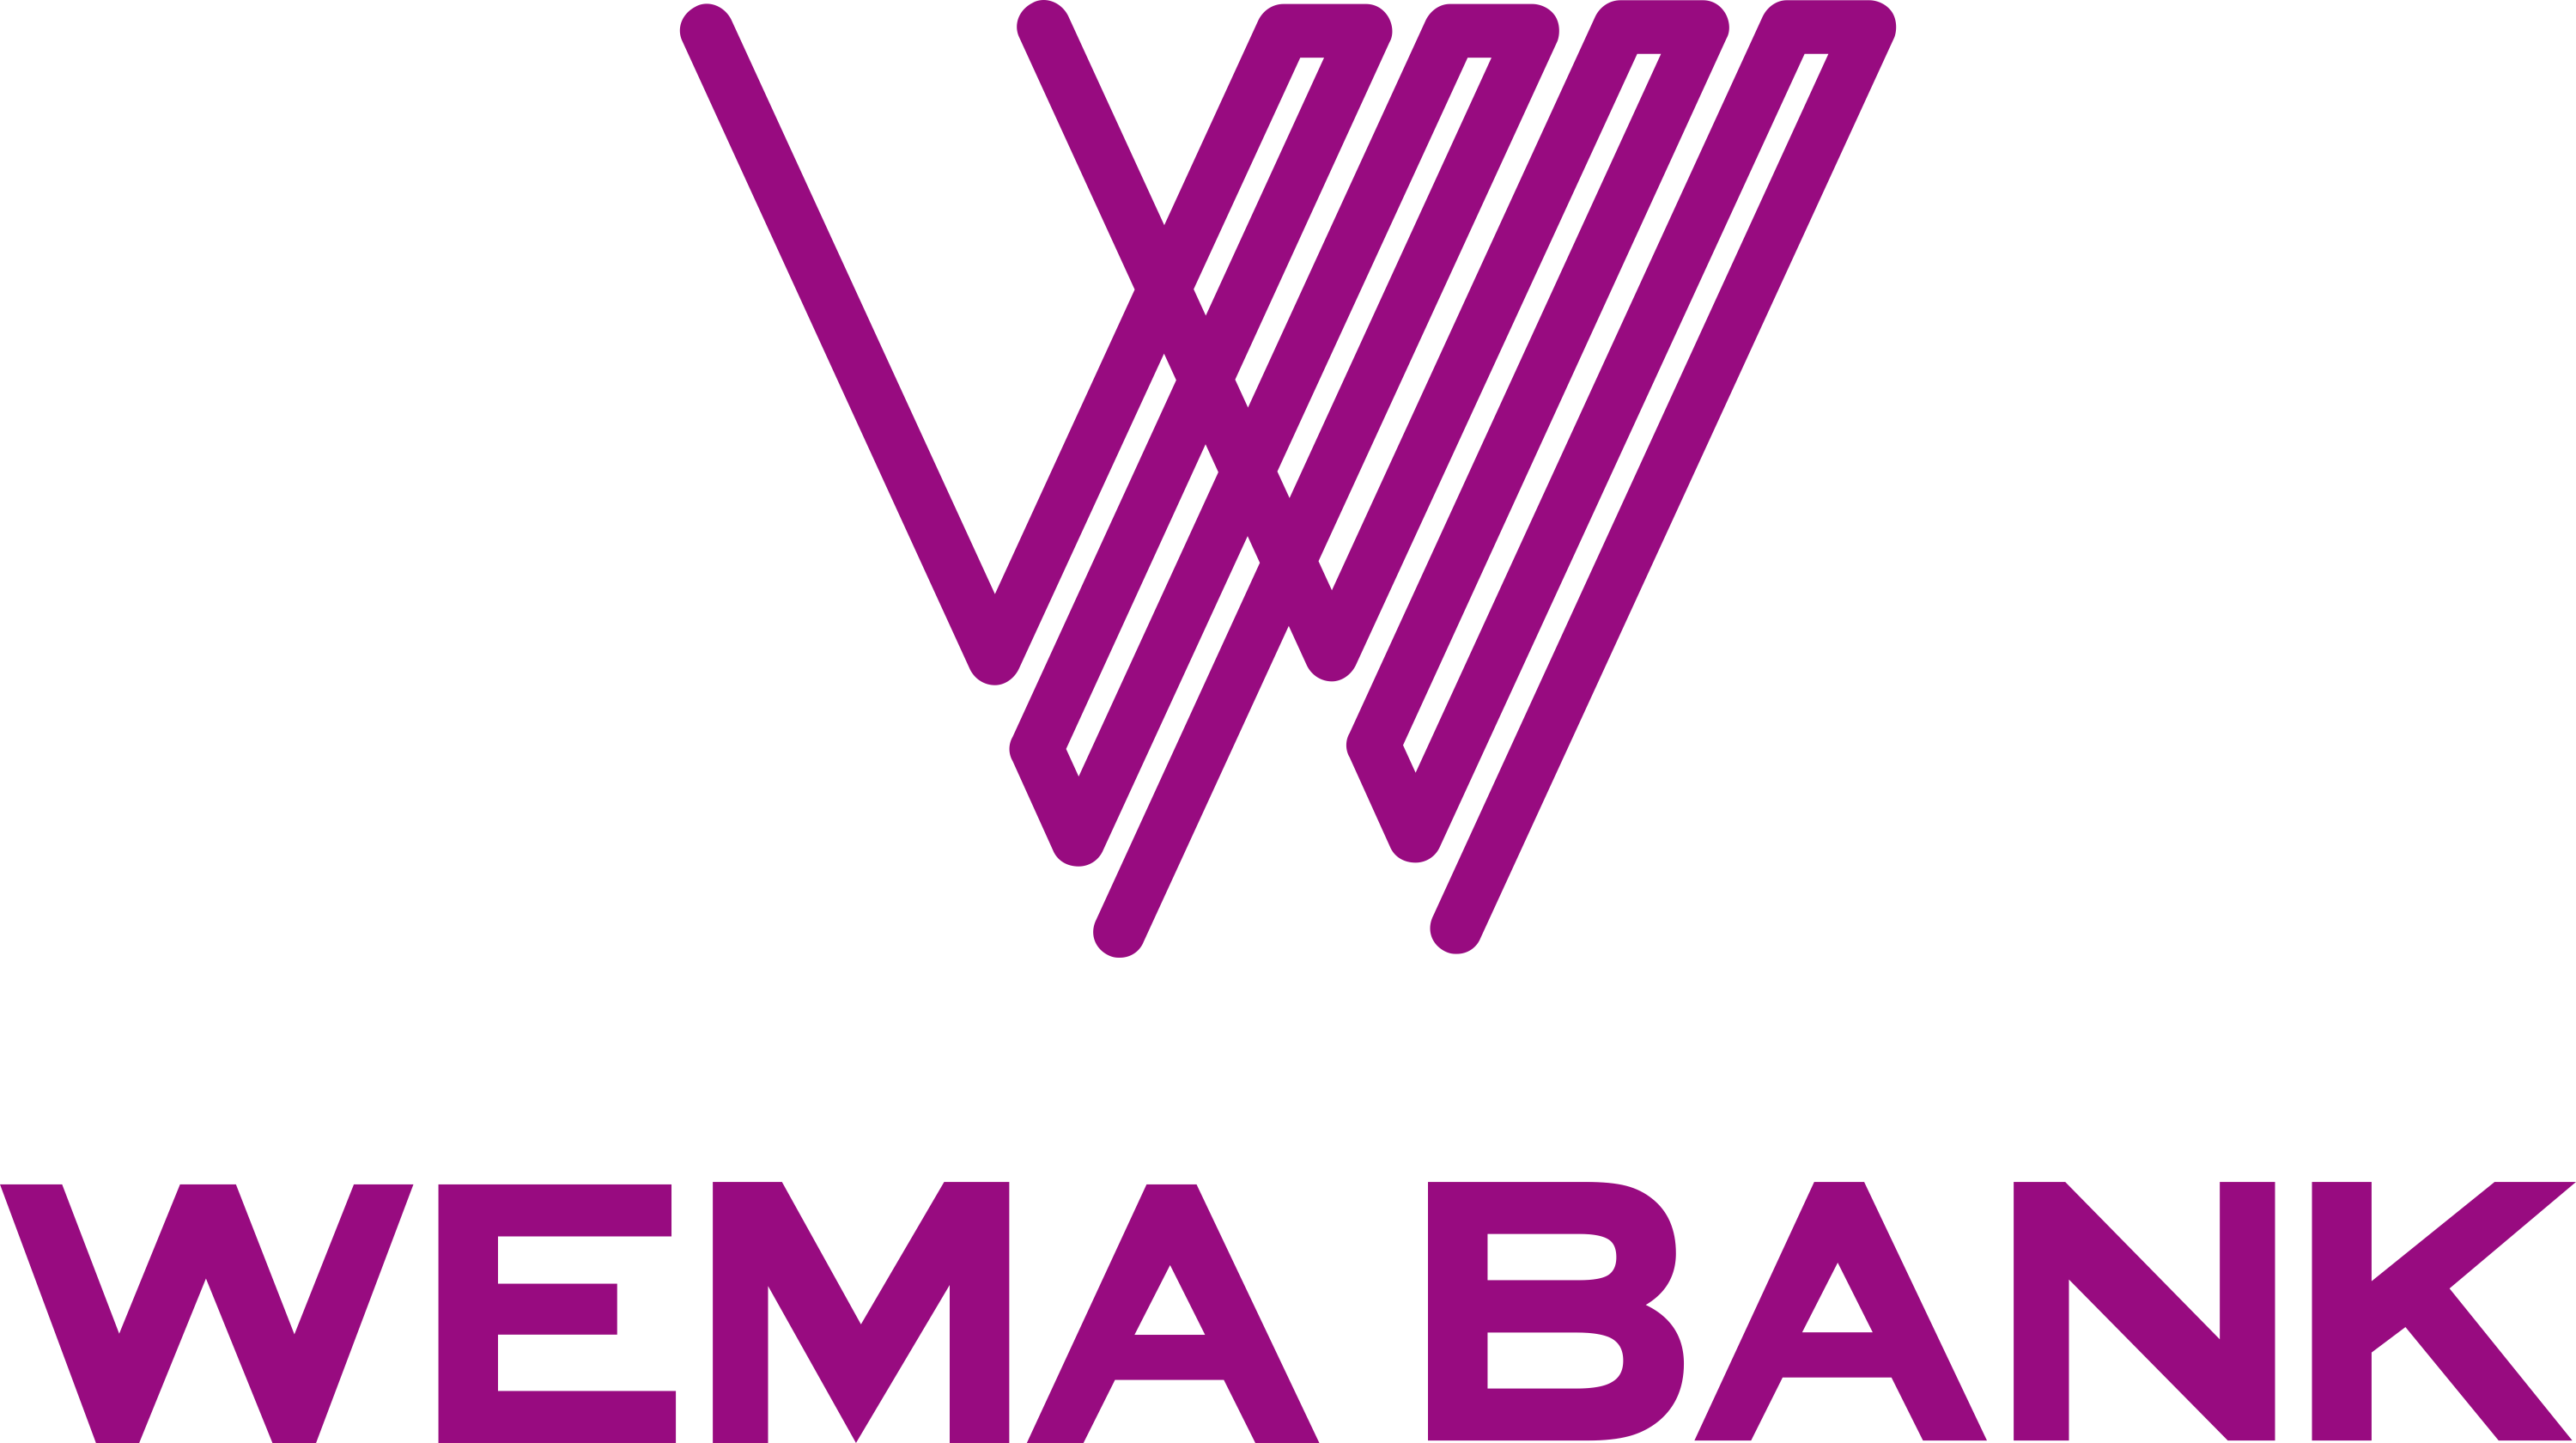 Wema Bank PLC has launched Season 3 of the Wema Bank 5 for 5 Promo, which will reward customers with N90,000,000 in cash prizes